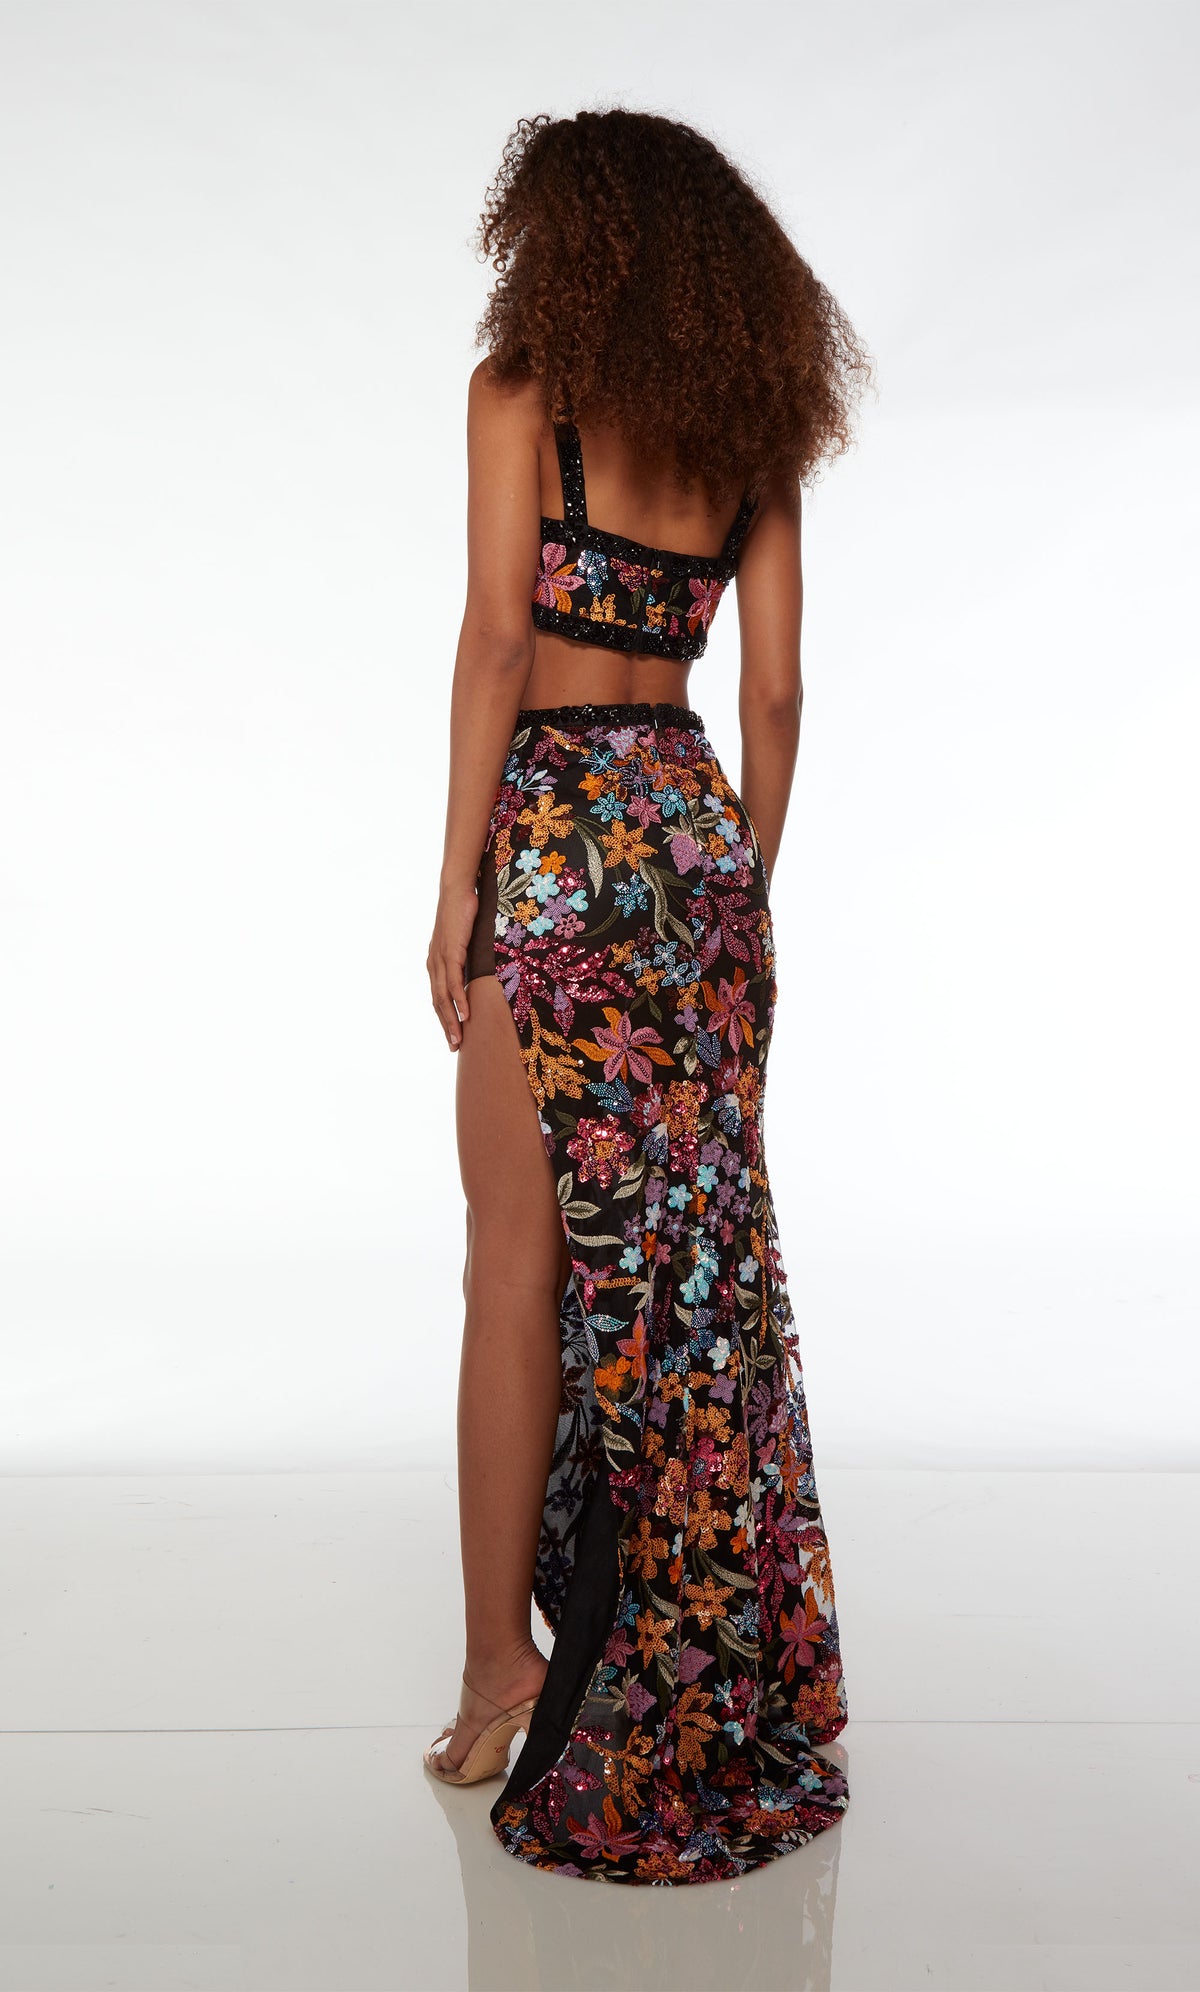 Stunning black two-piece dress: V-neck crop top and high-waisted skirt adorned with black rhinestone trim, high slit, slight train, and colorful sequined flowers.